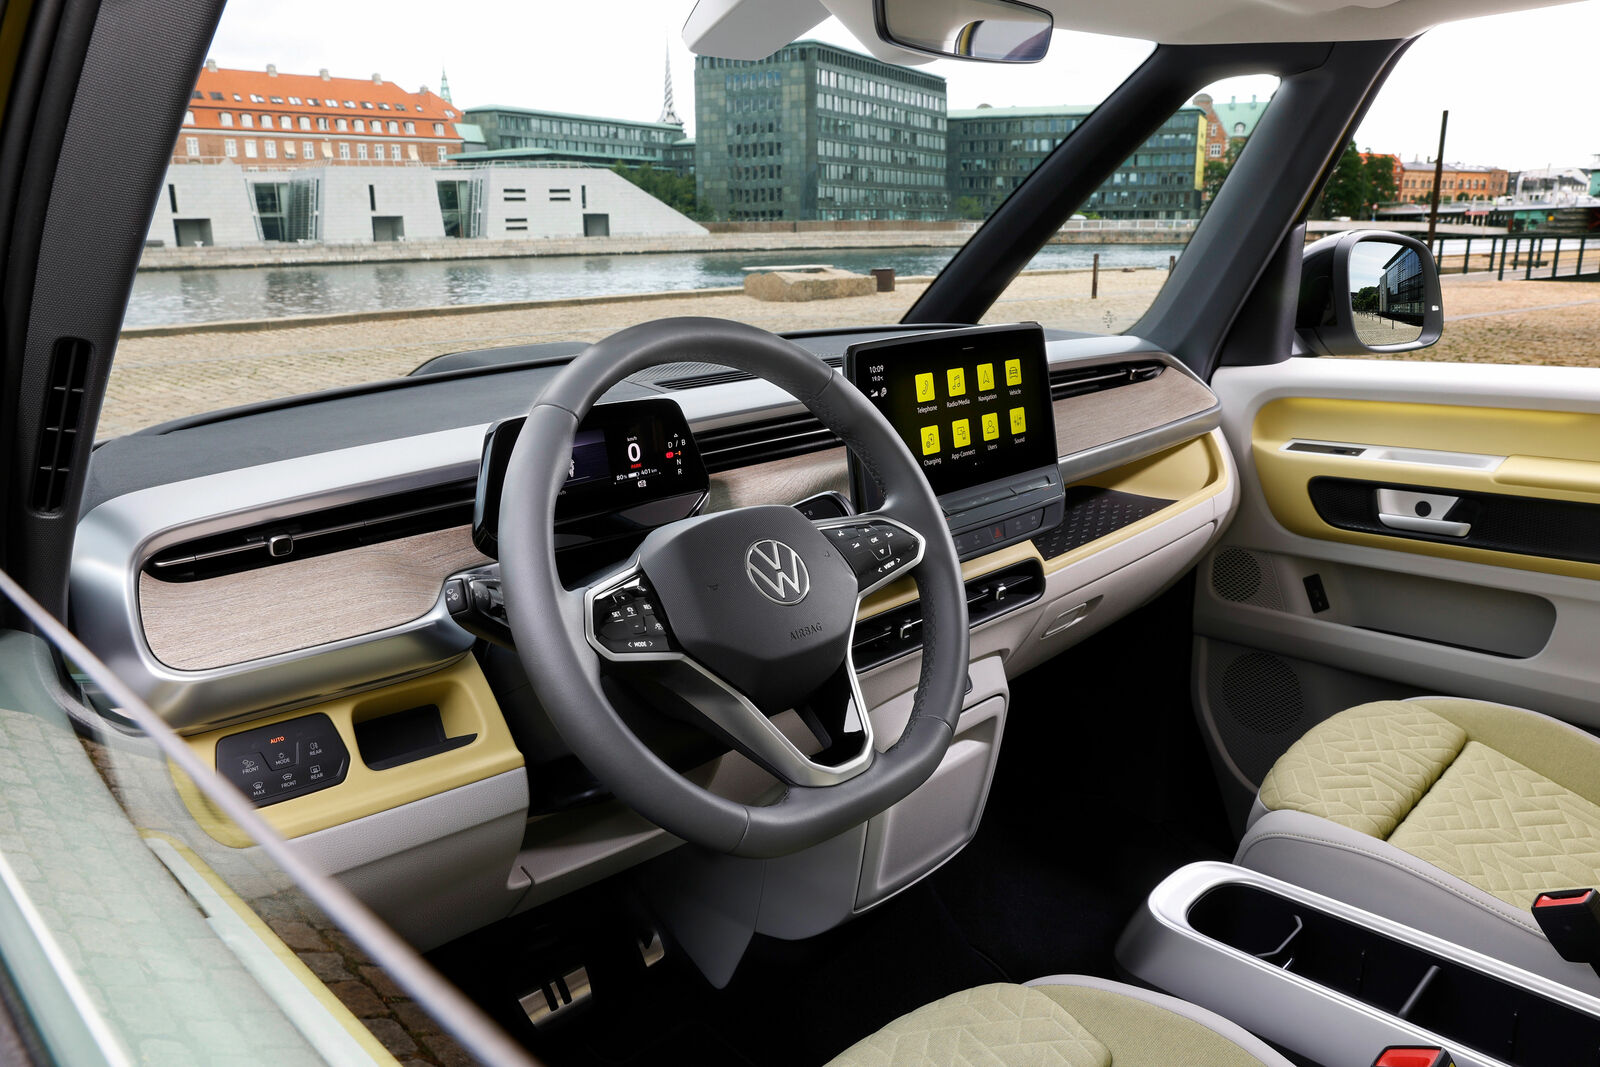 In the all-electric ID. Buzz from Volkswagen, seat covers made from marine plastic yarn are used.